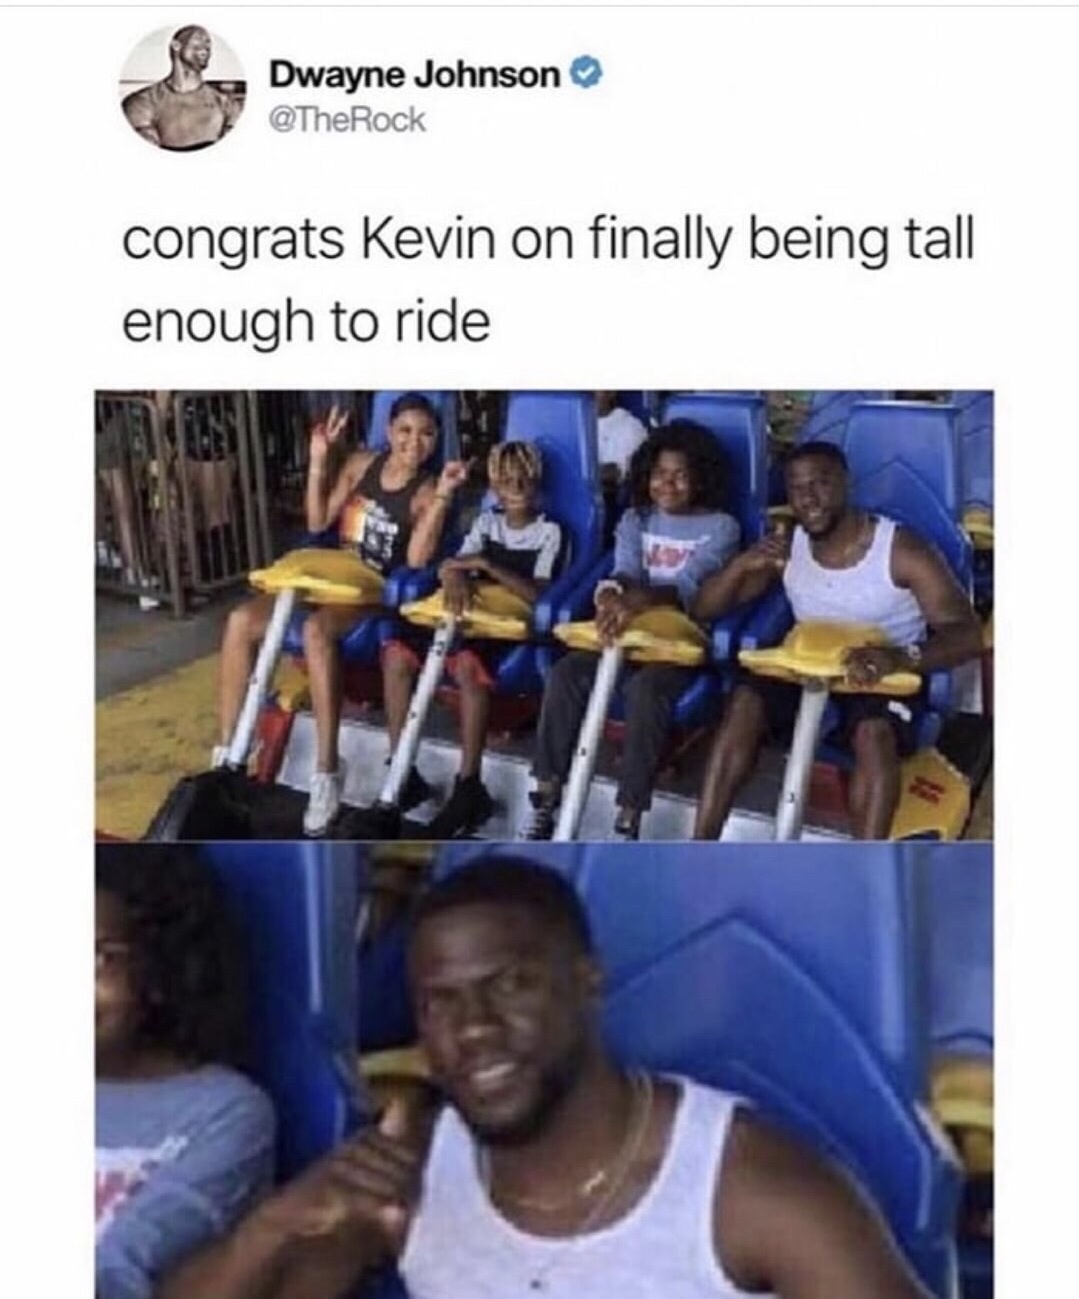 congrats kevin on finally being tall enough - Dwayne Johnson congrats Kevin on finally being tall enough to ride